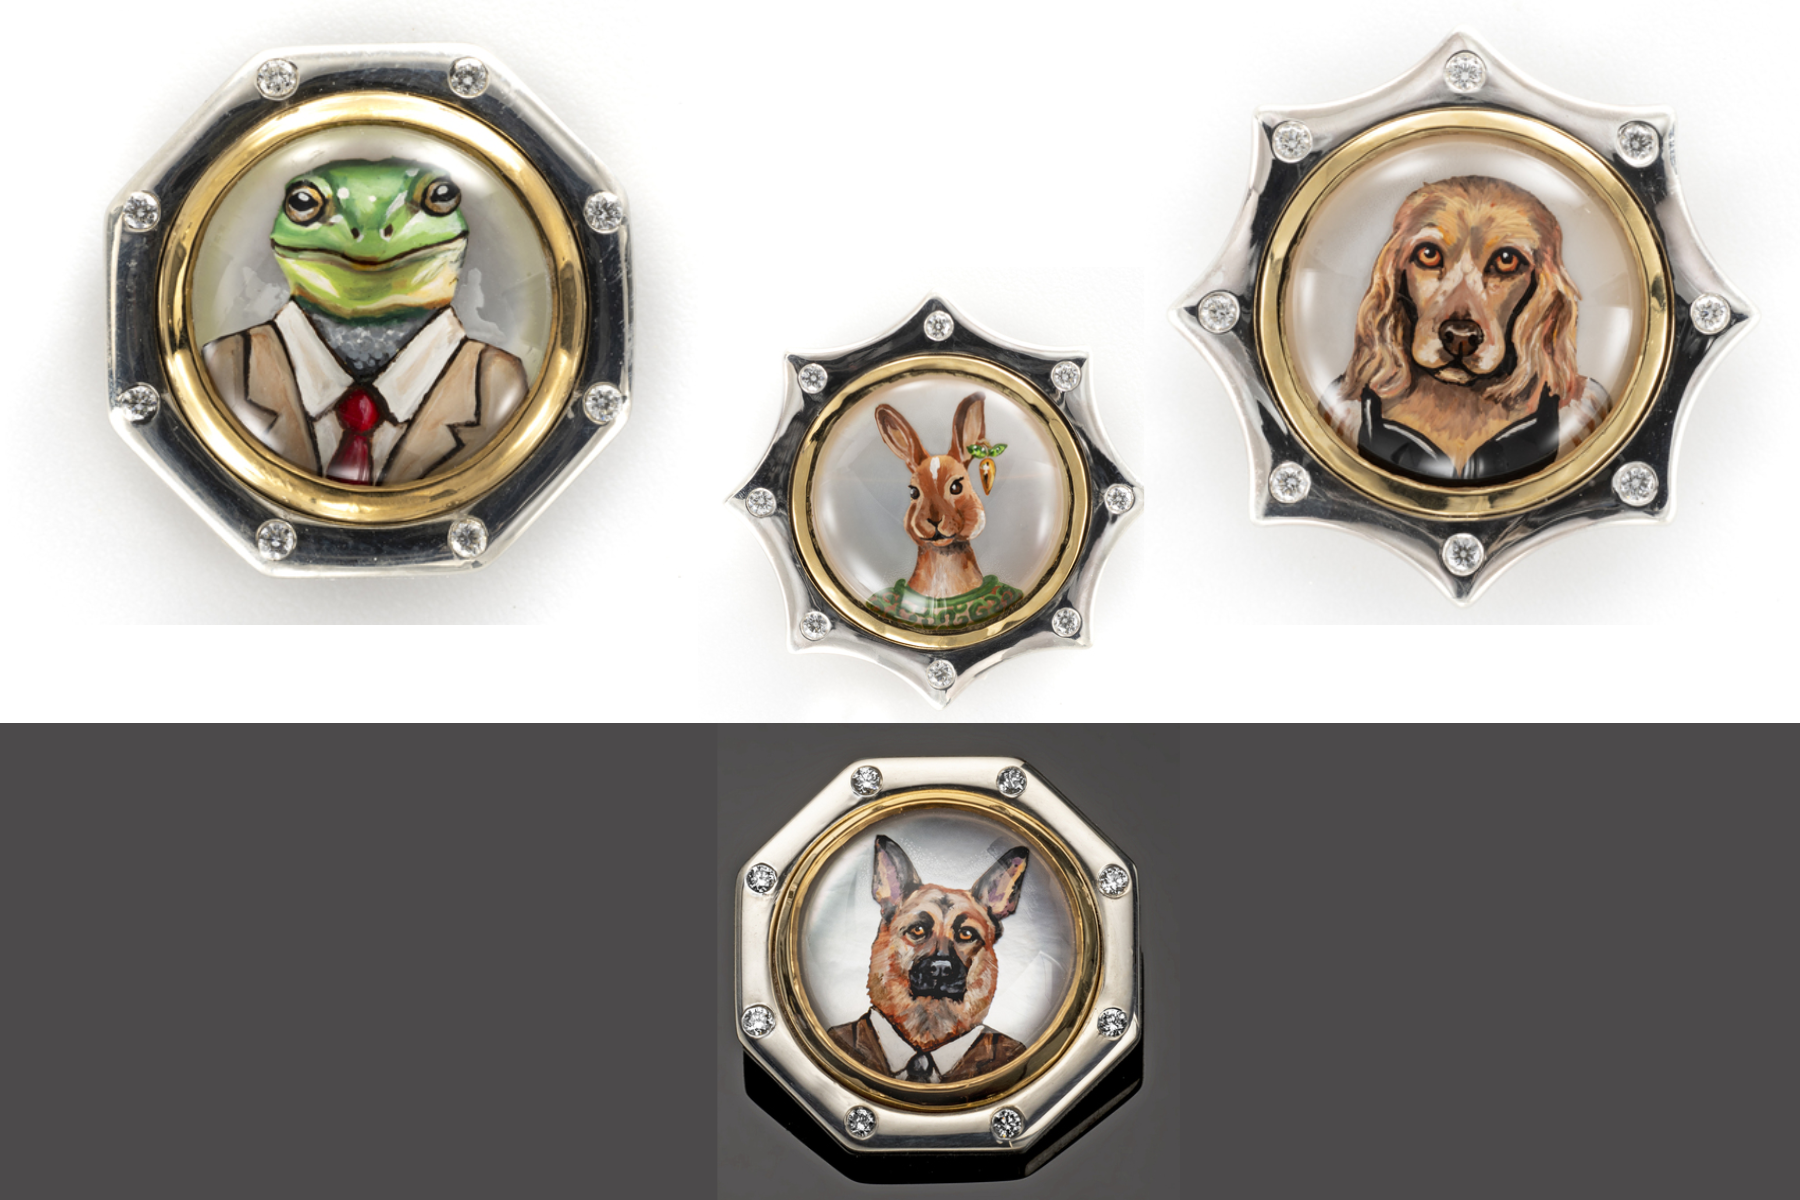 Rotenier's renditions of antique animal portrait jewelry feature his subjects dressed in human clothing